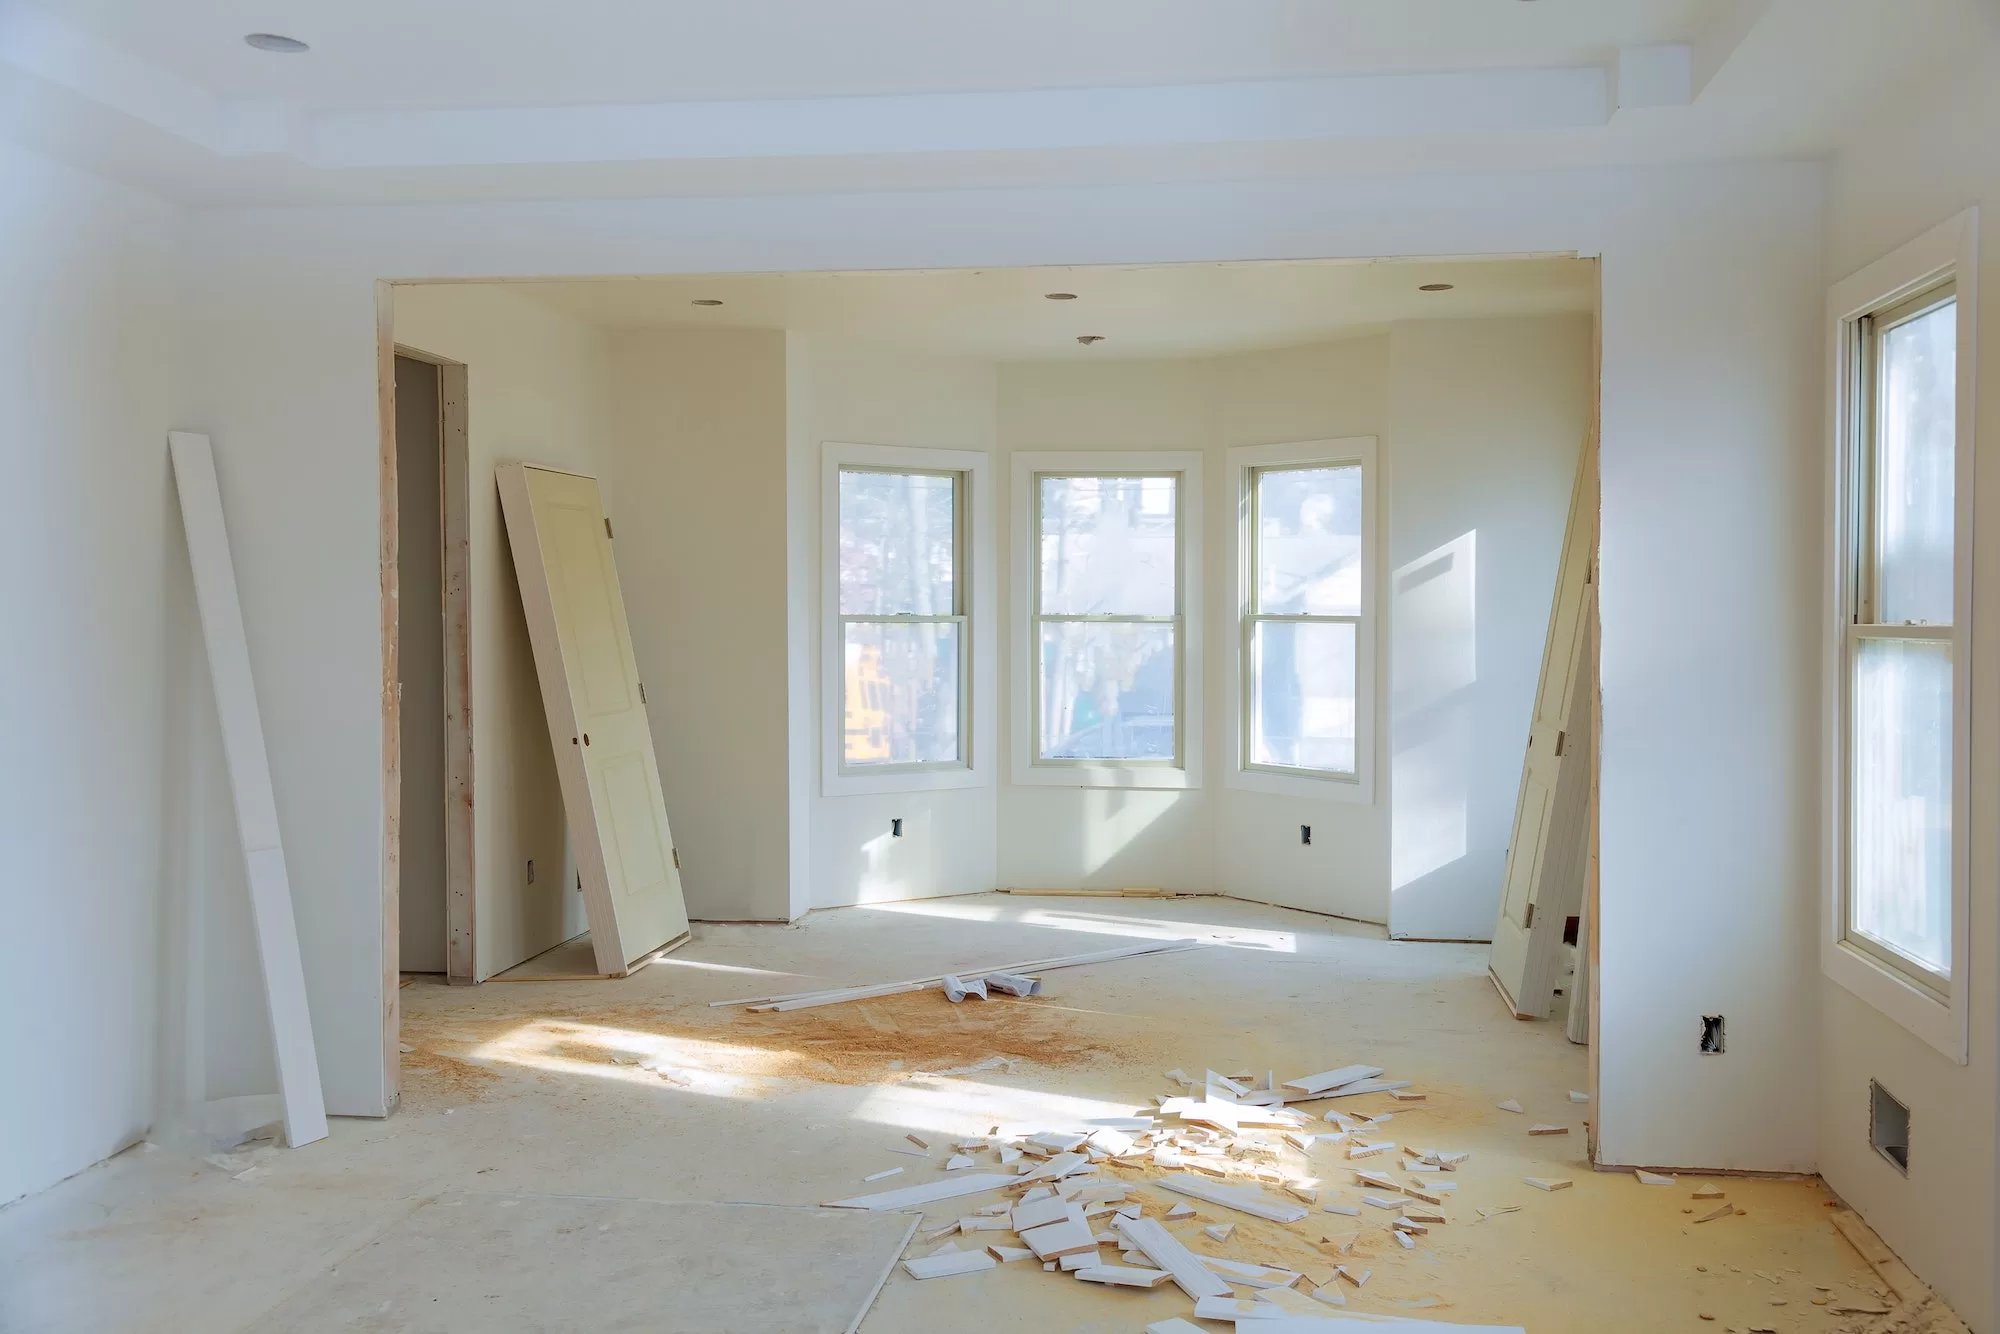 Interior construction of housing Construction building industry new home construction interior